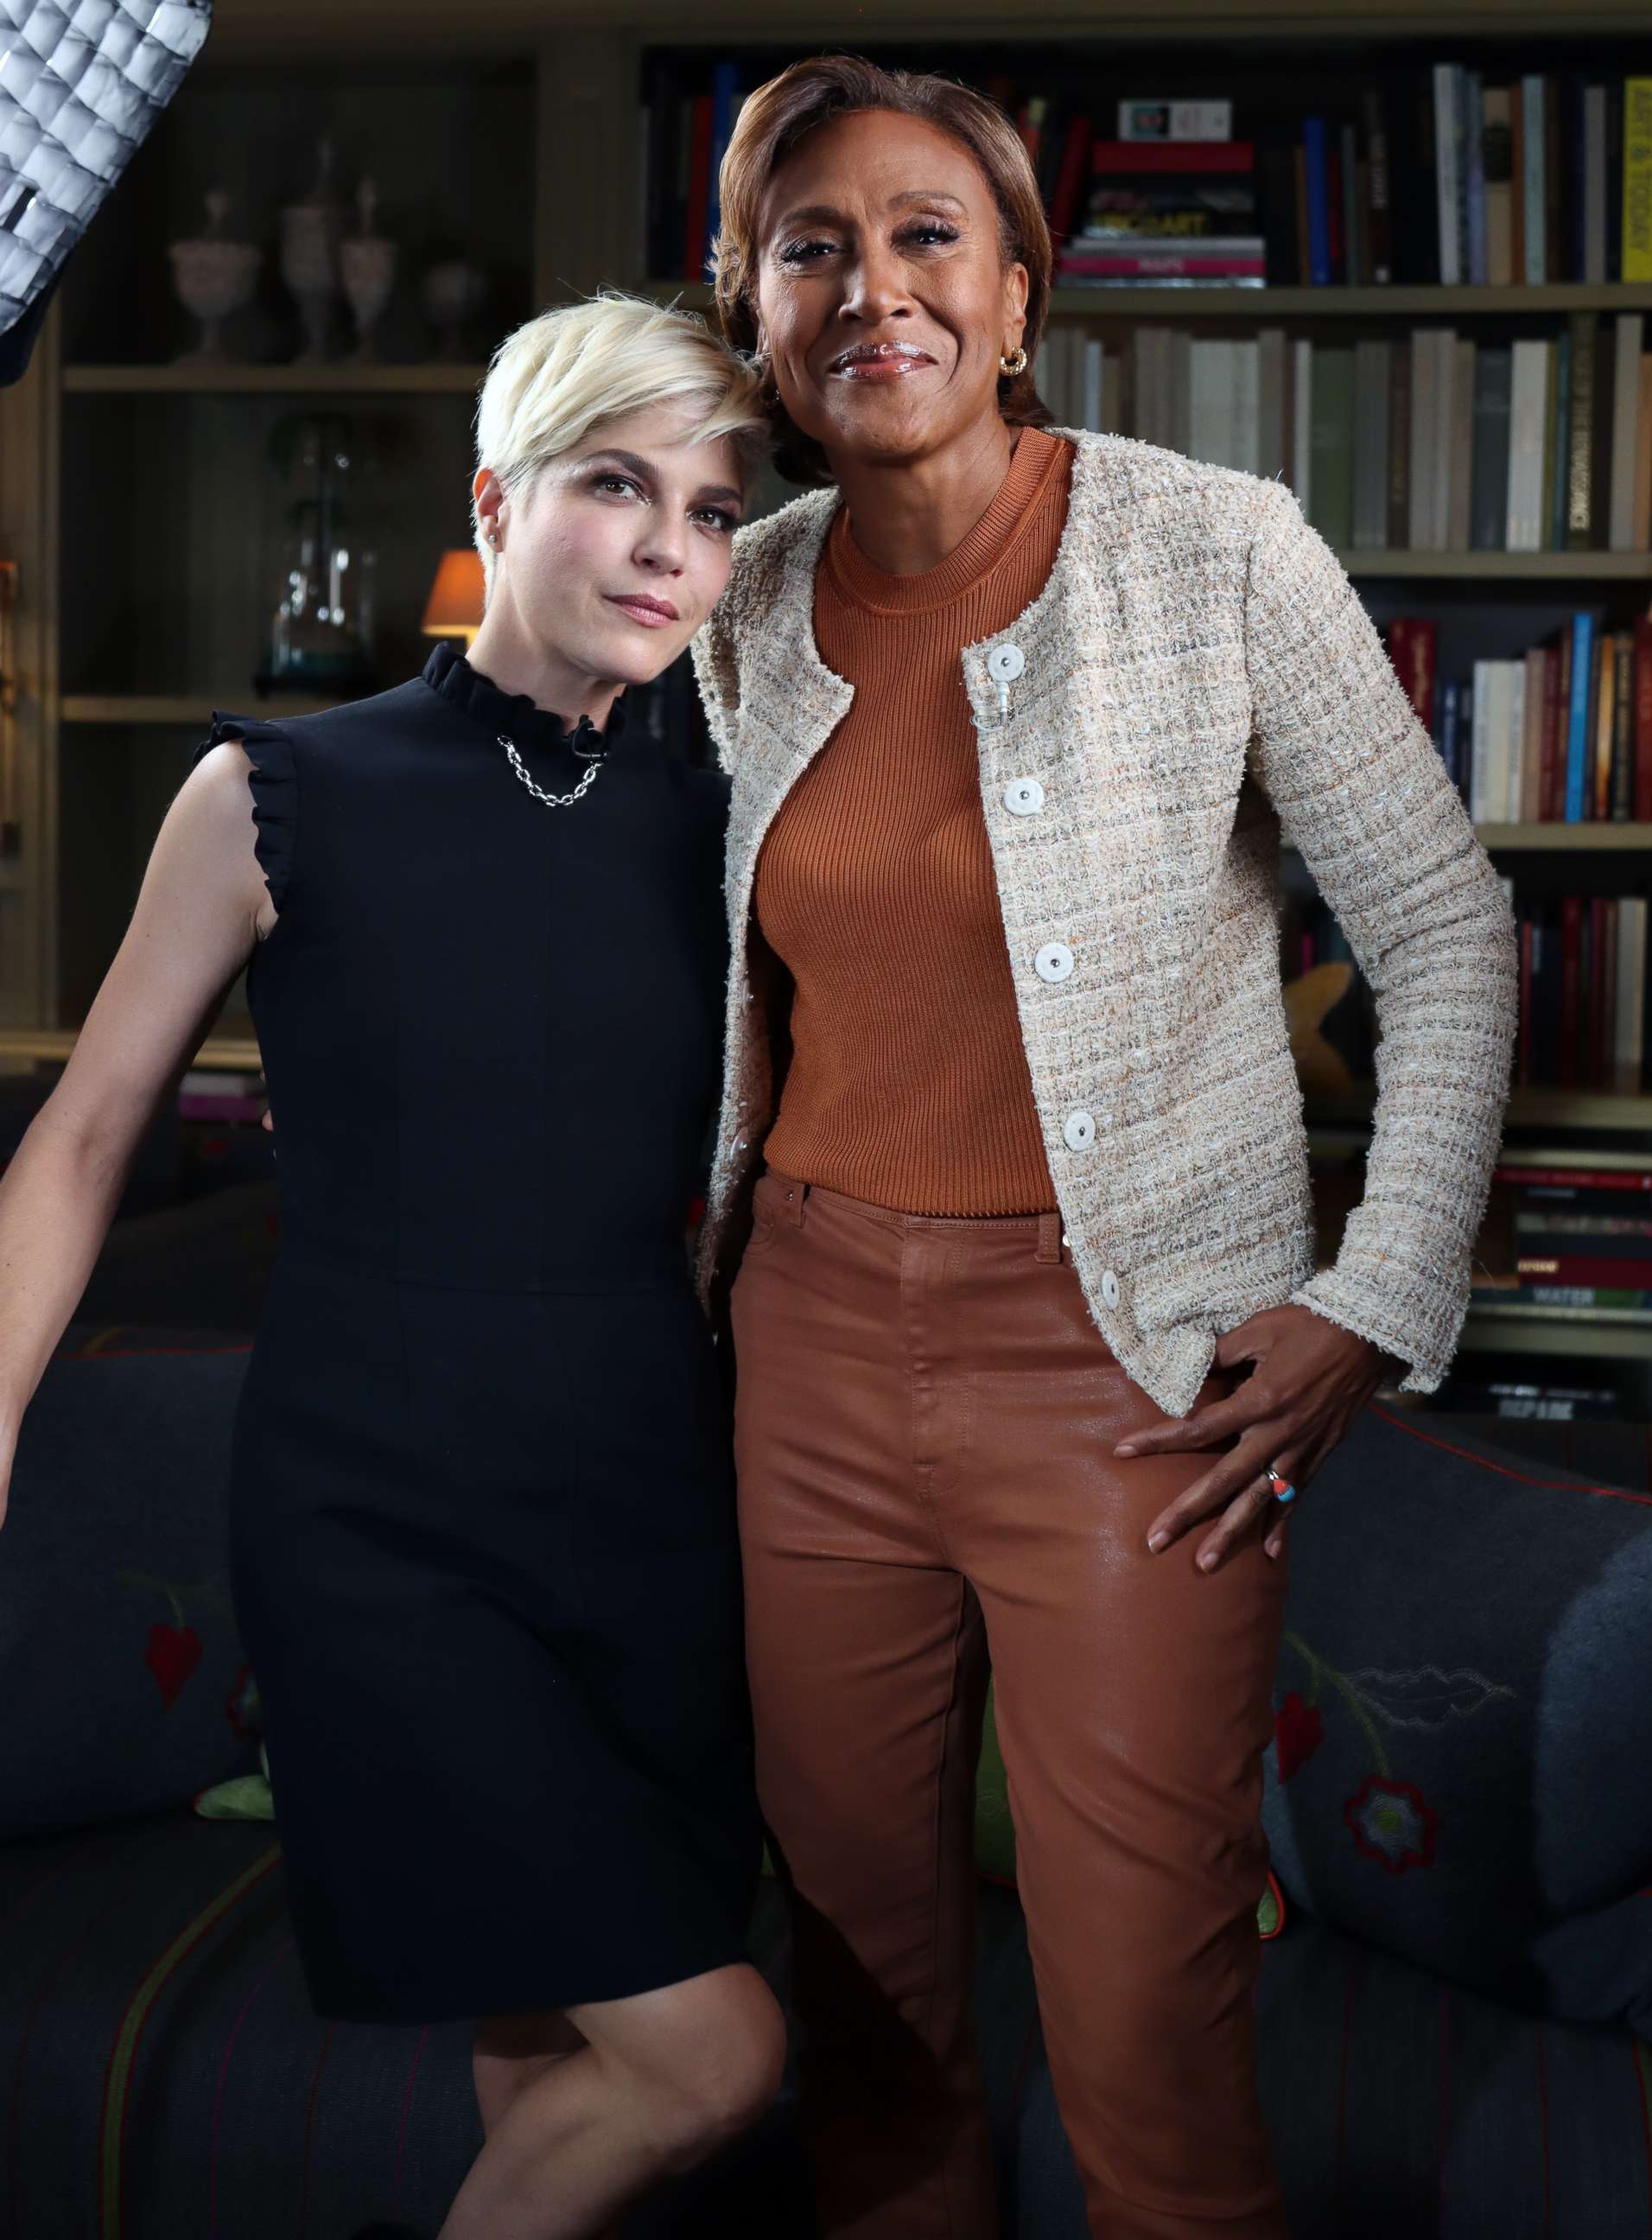 PHOTO: Selma Blair speaks to ABC News' Robin Roberts on Oct. 7, 2021, about her life with MS after a 2019 stem cell transplant.